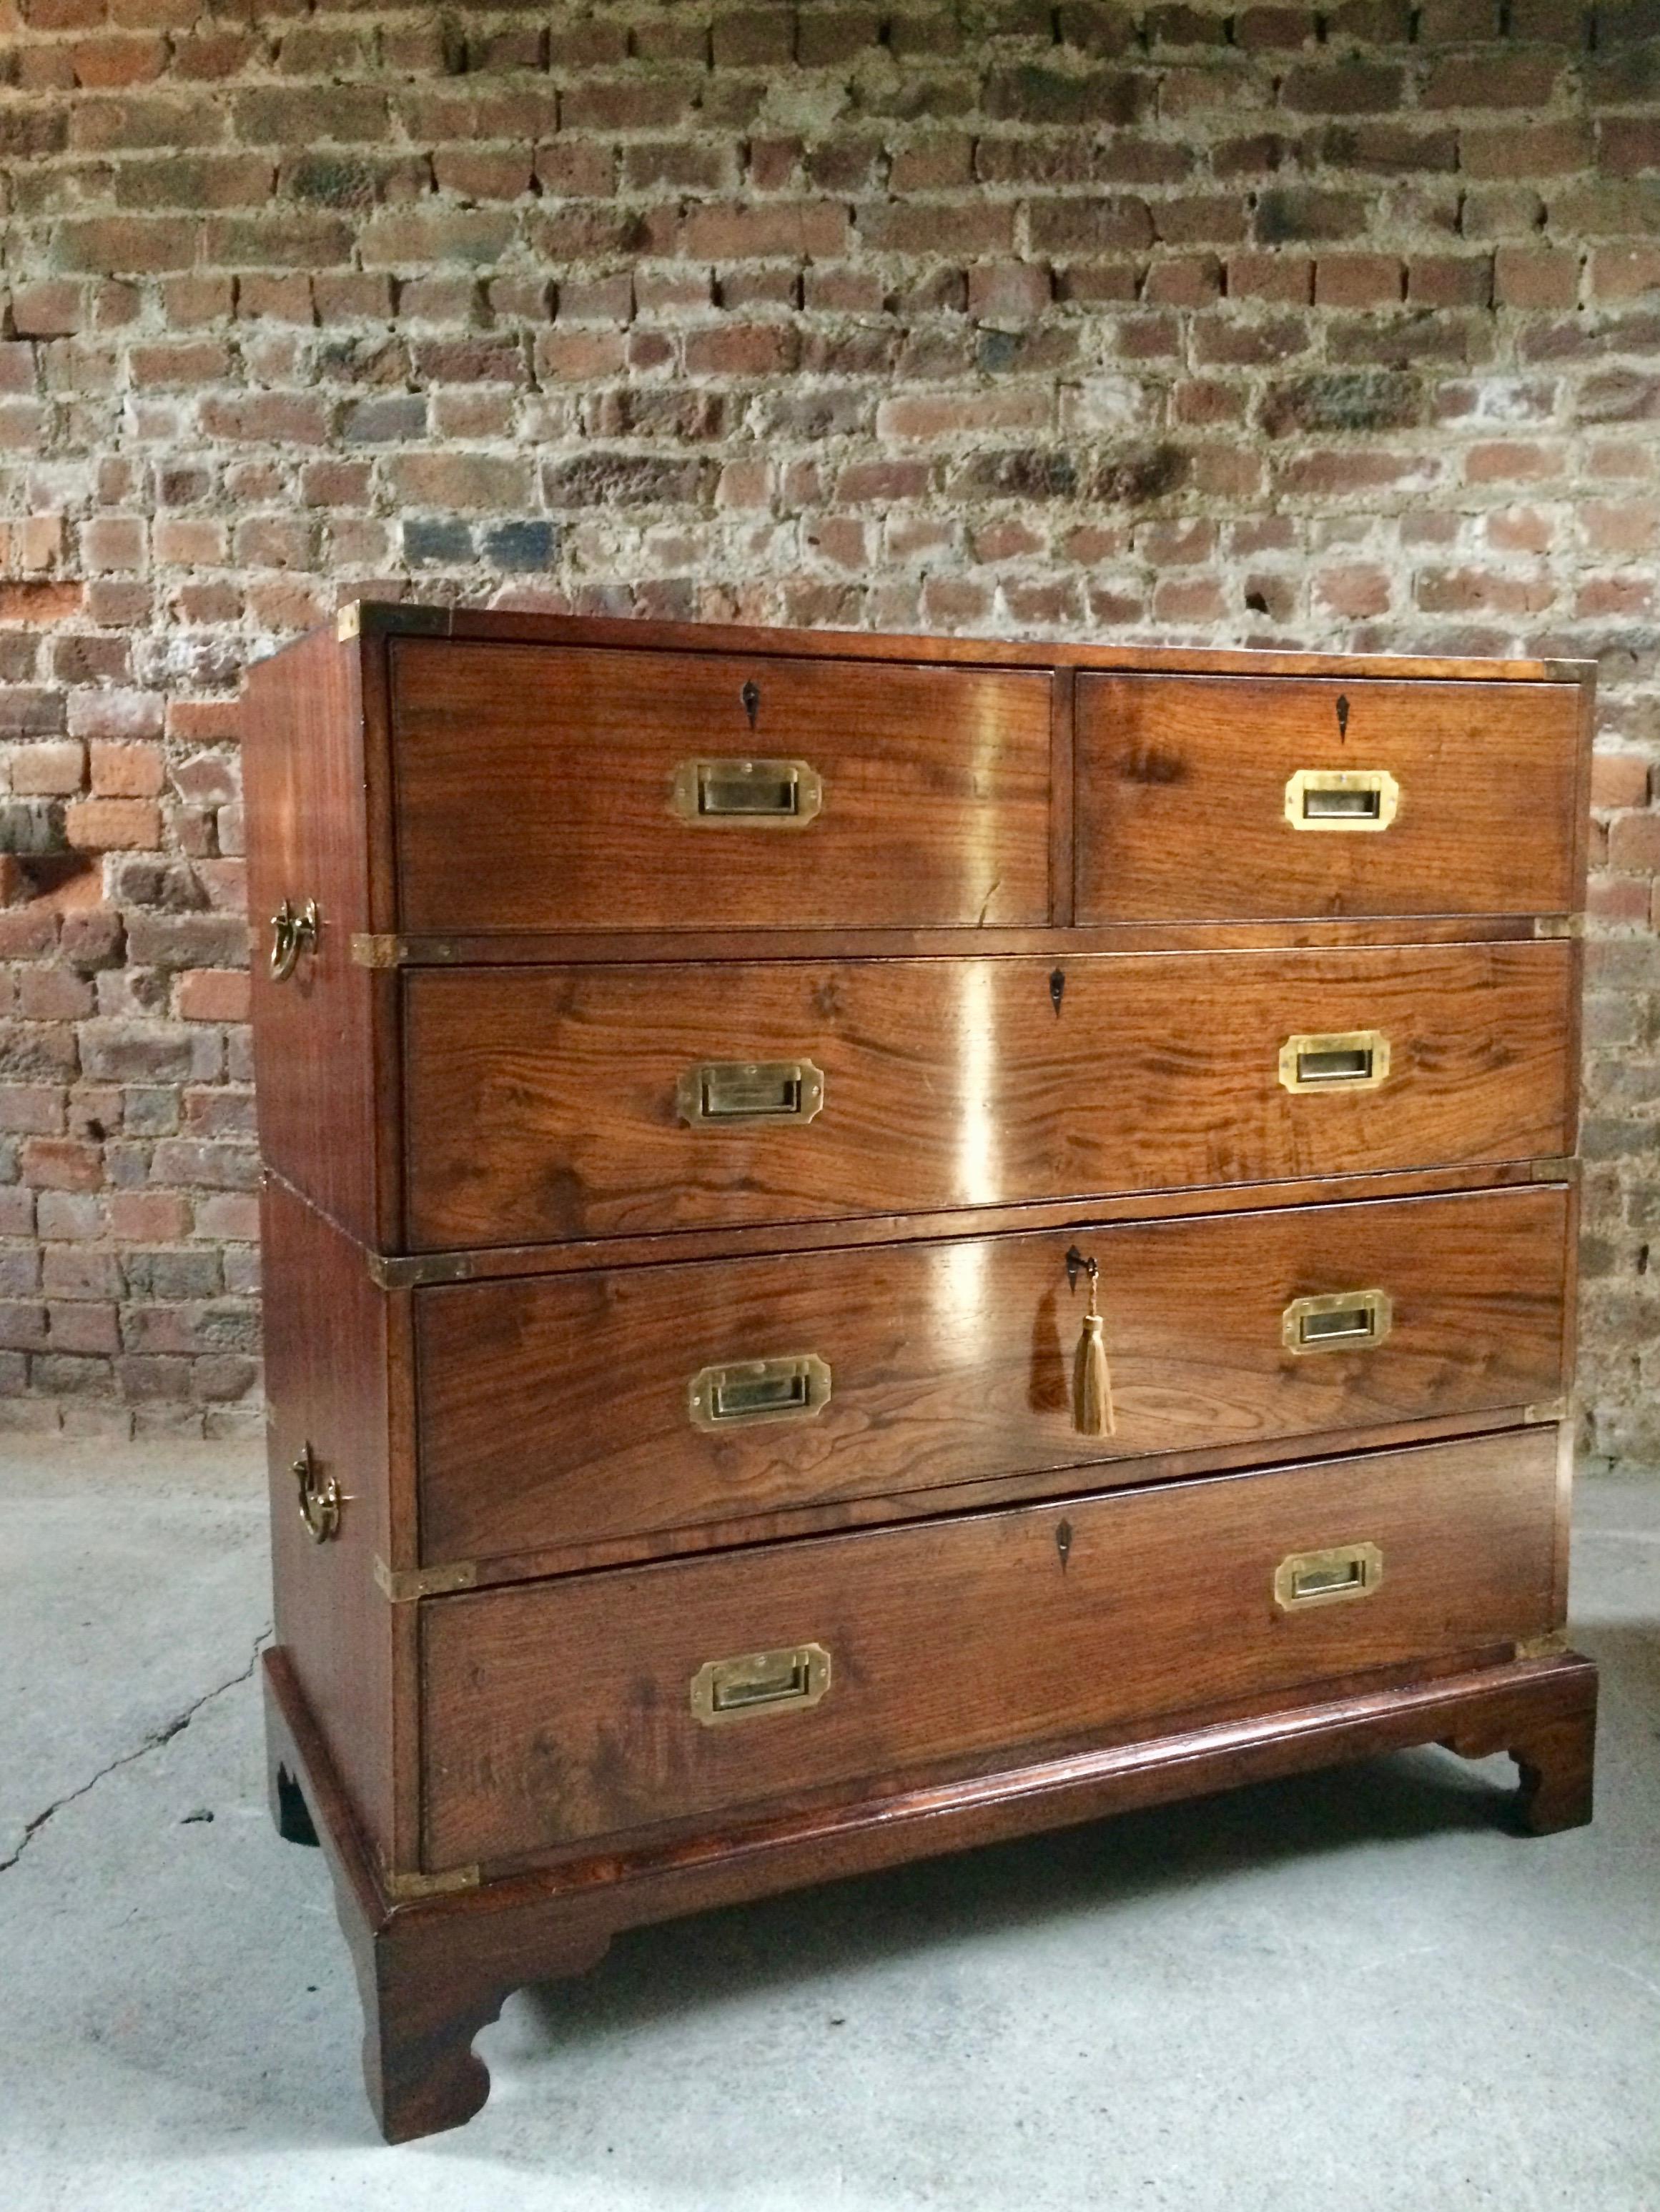 Antique 19th century mahogany brass-mounted campaign chest of drawers circa 1860, the rectangular top complete with brass corner protectors over two short and three longer graduated drawers all camphor wood lined, all fitted with campaign brass